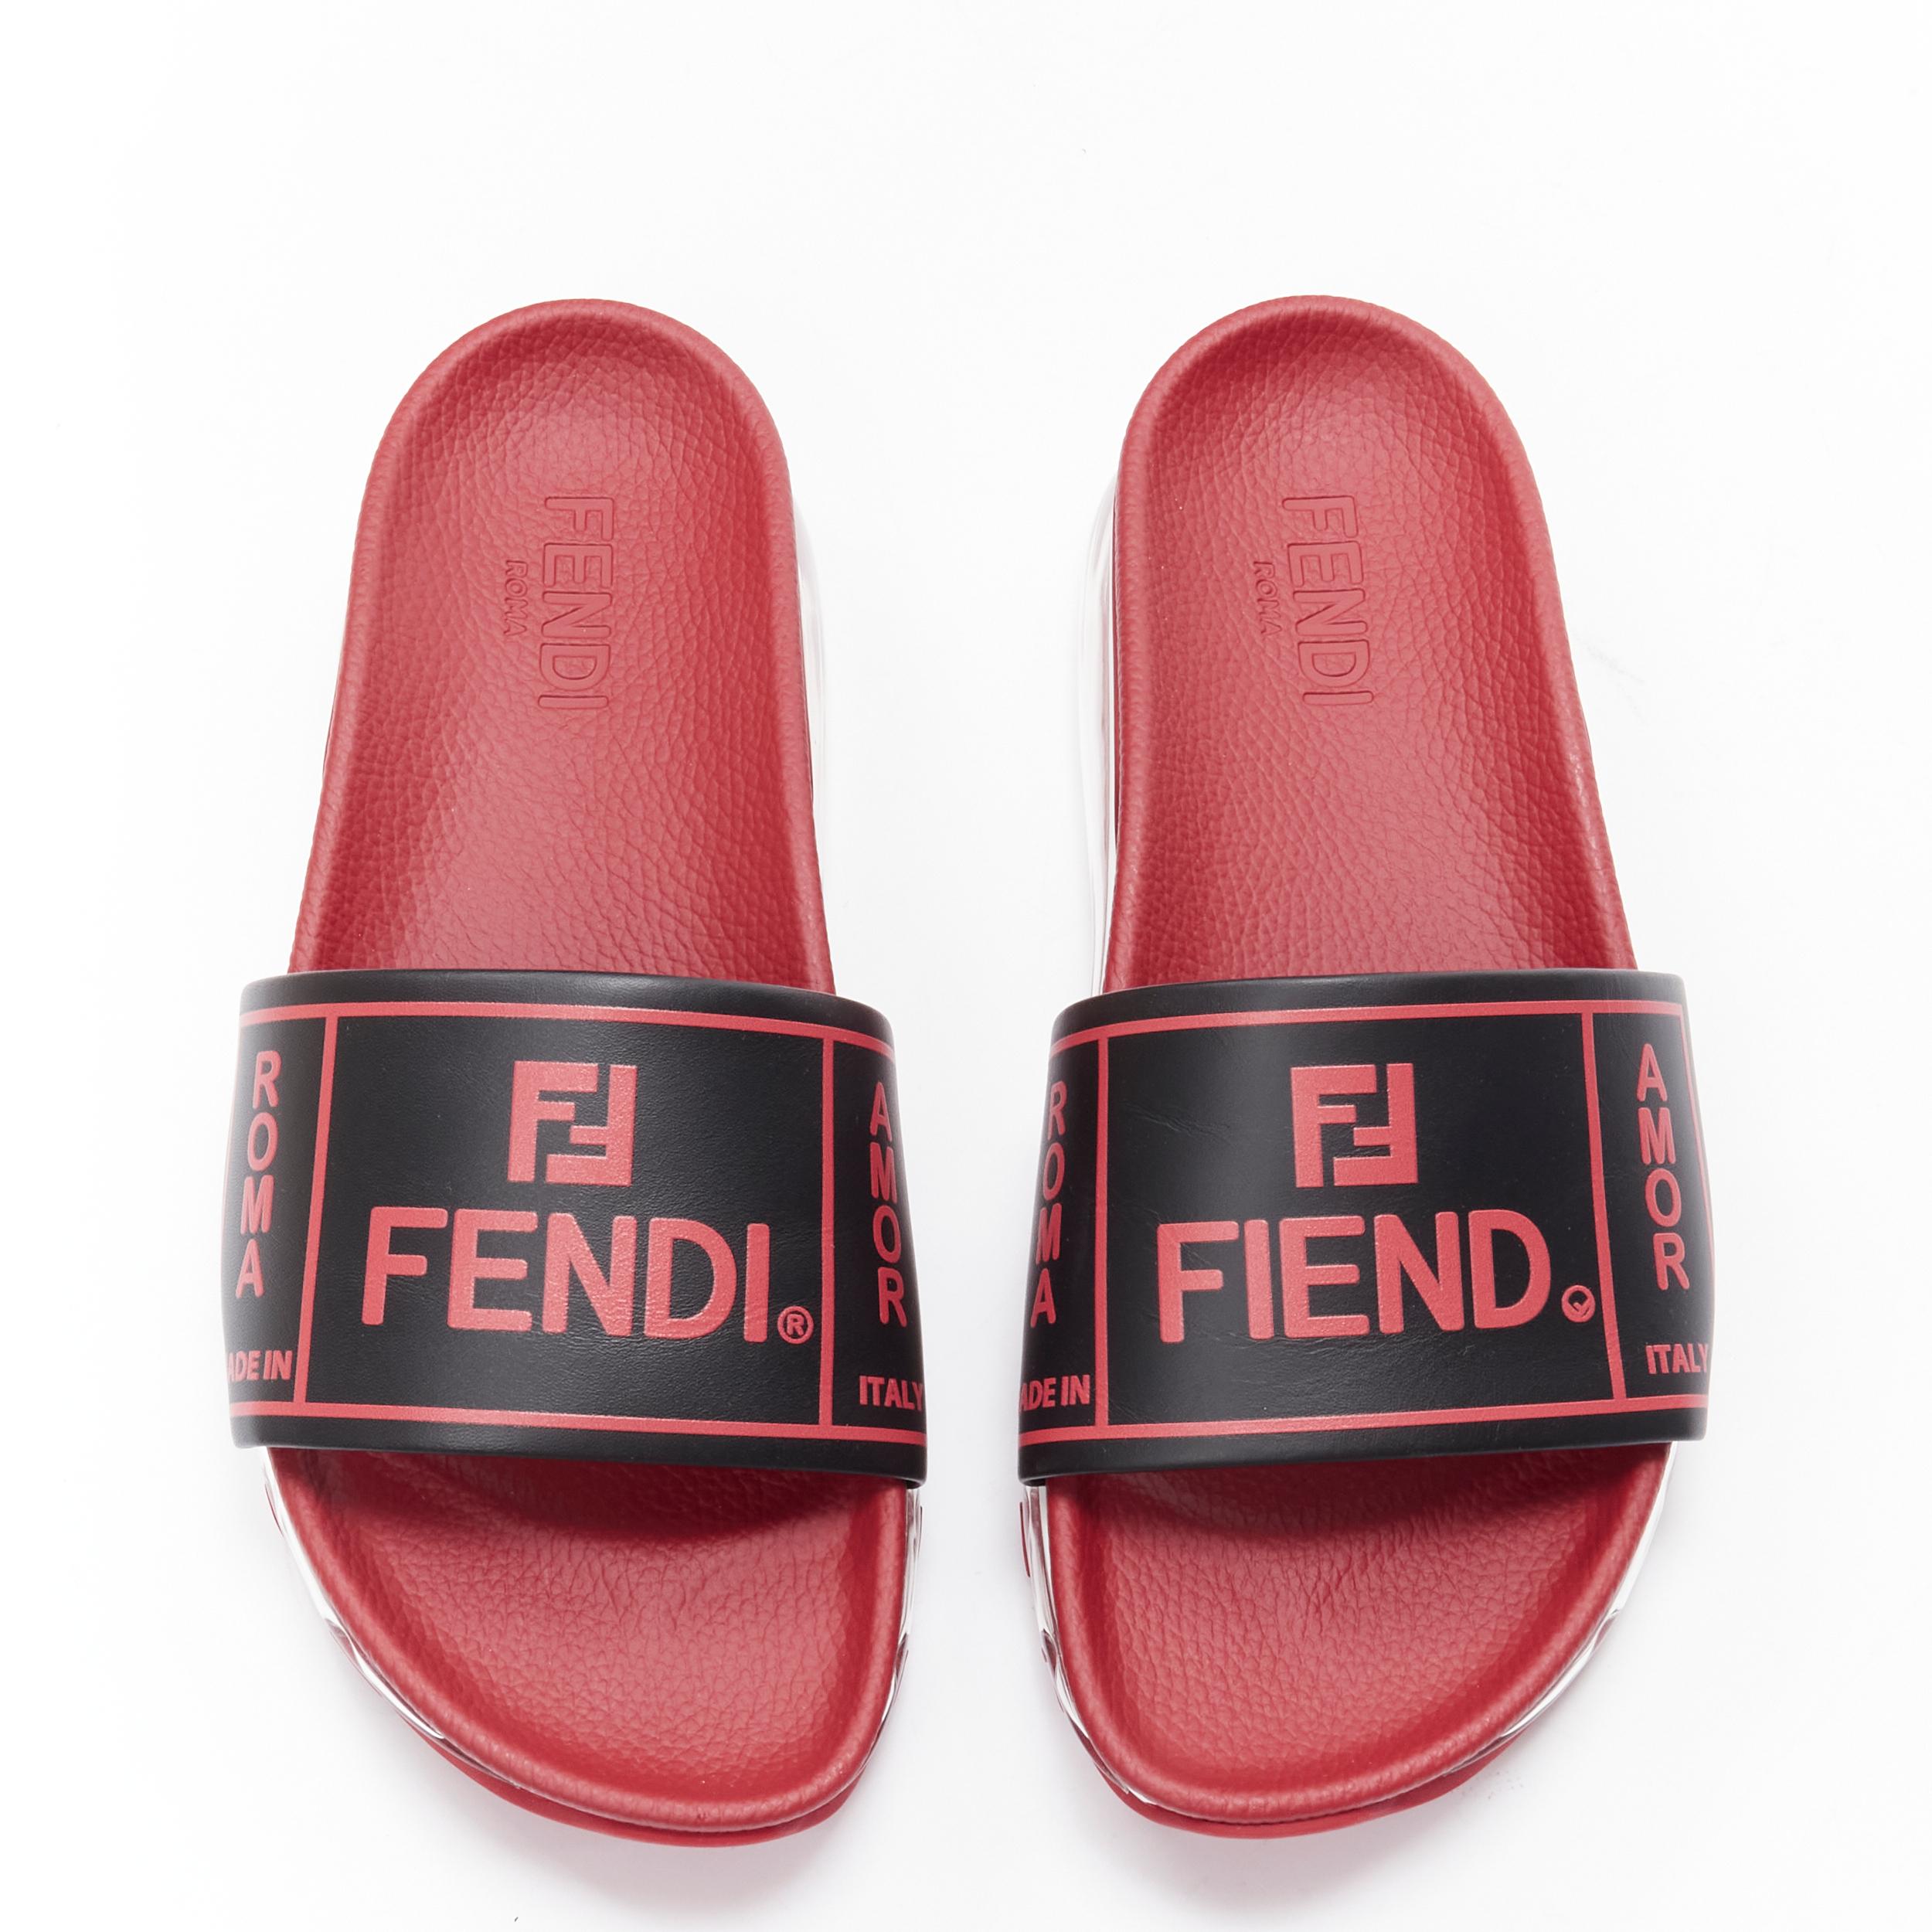 new FENDI Fiend Roma Amor black red leather air sole slides sandals UK9 EU43 
Reference: TGAS/B01607 
Brand: Fendi 
Model: Fiend slides 
Material: Leather 
Color: Red 
Pattern: Solid 
Extra Detail: Fendi logo print. Leather strap. Pebble leather